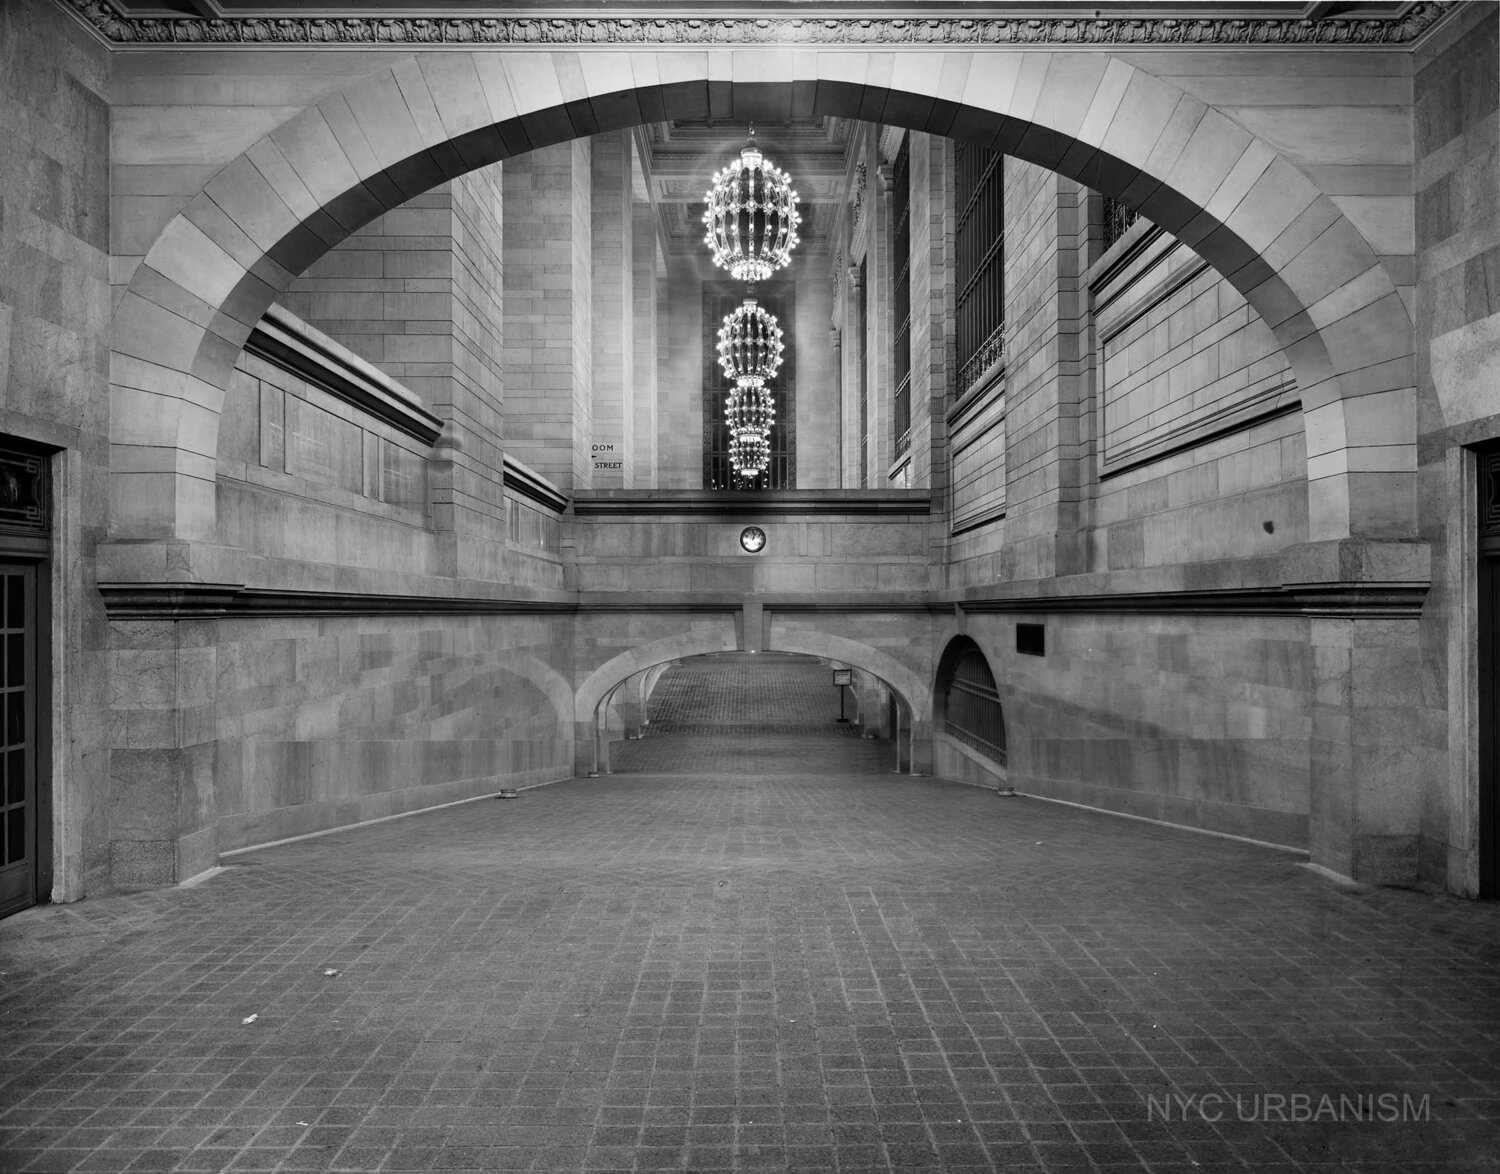 Grand Central Station, NYC, 1929. This view is no longer possible to see,  because skyscrapers now block the sunlight. : r/interestingasfuck